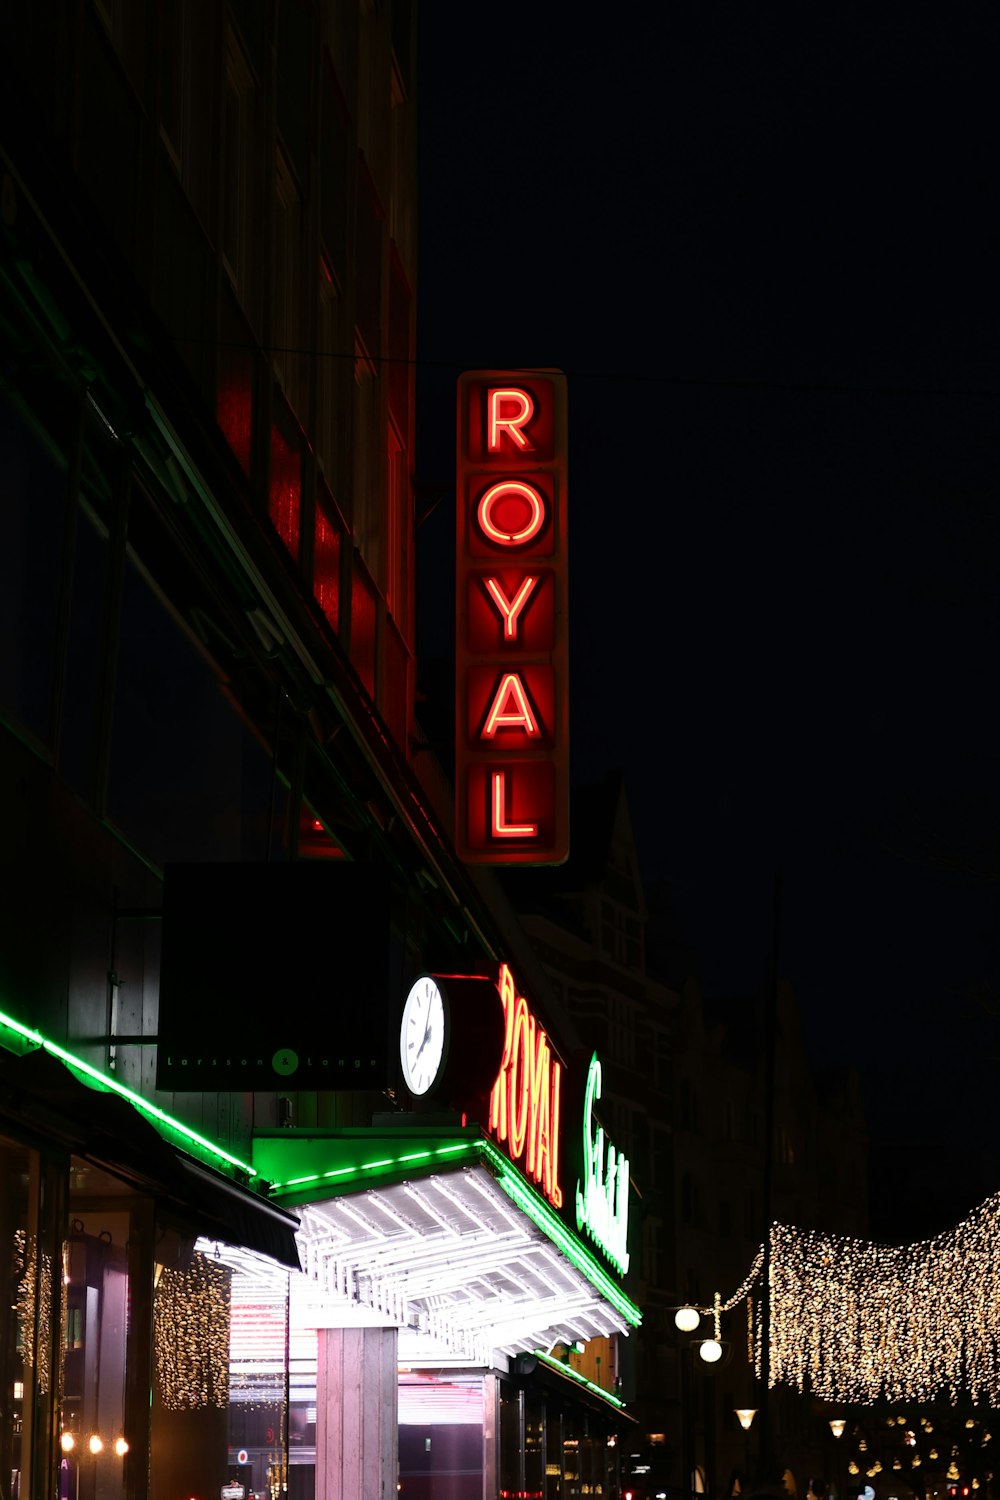 the royal hotel sign is lit up at night